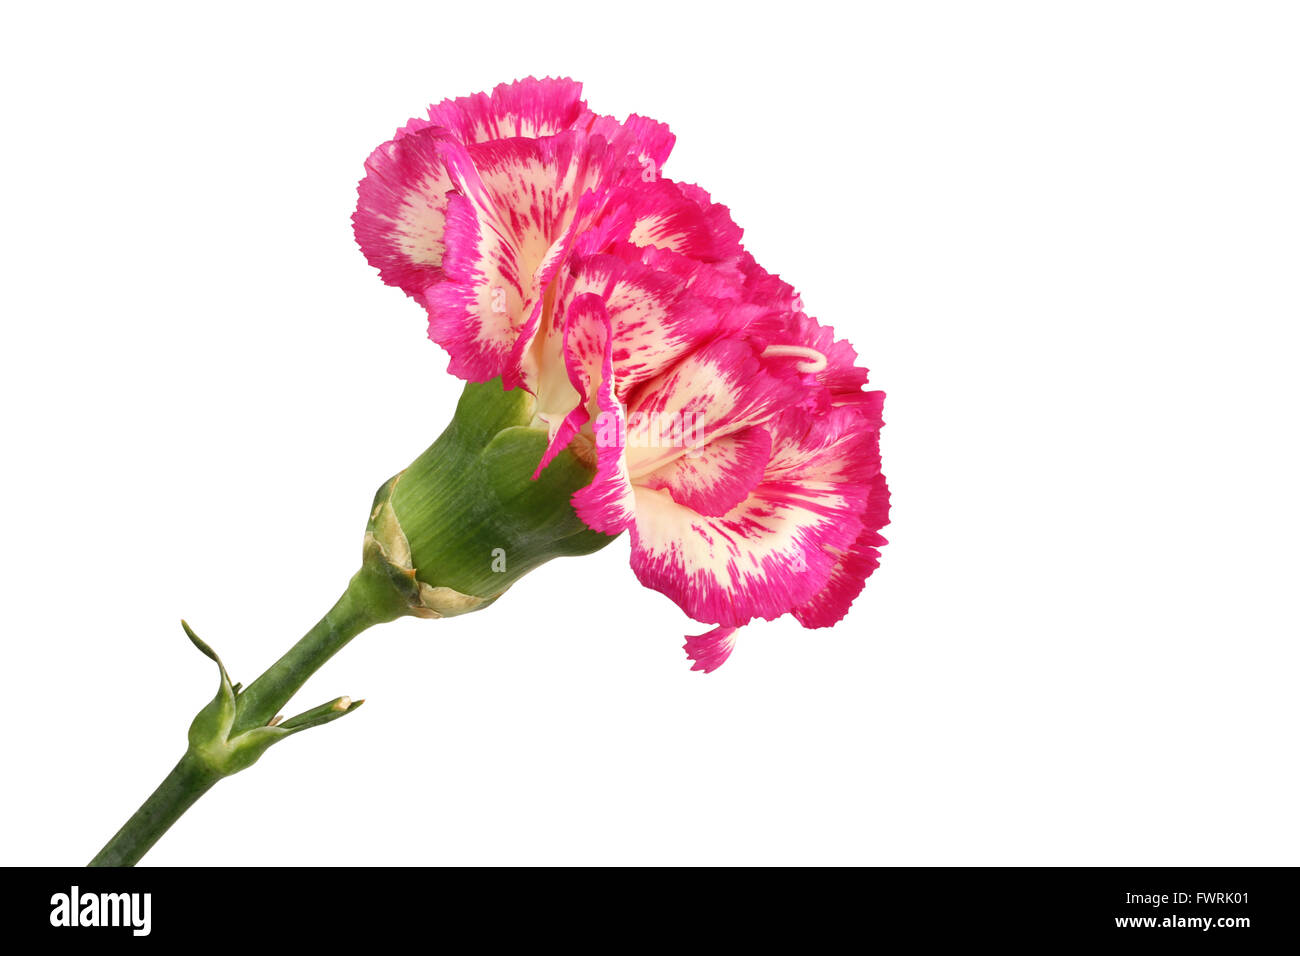 Carnation garden Cut Out Stock Images & Pictures - Alamy